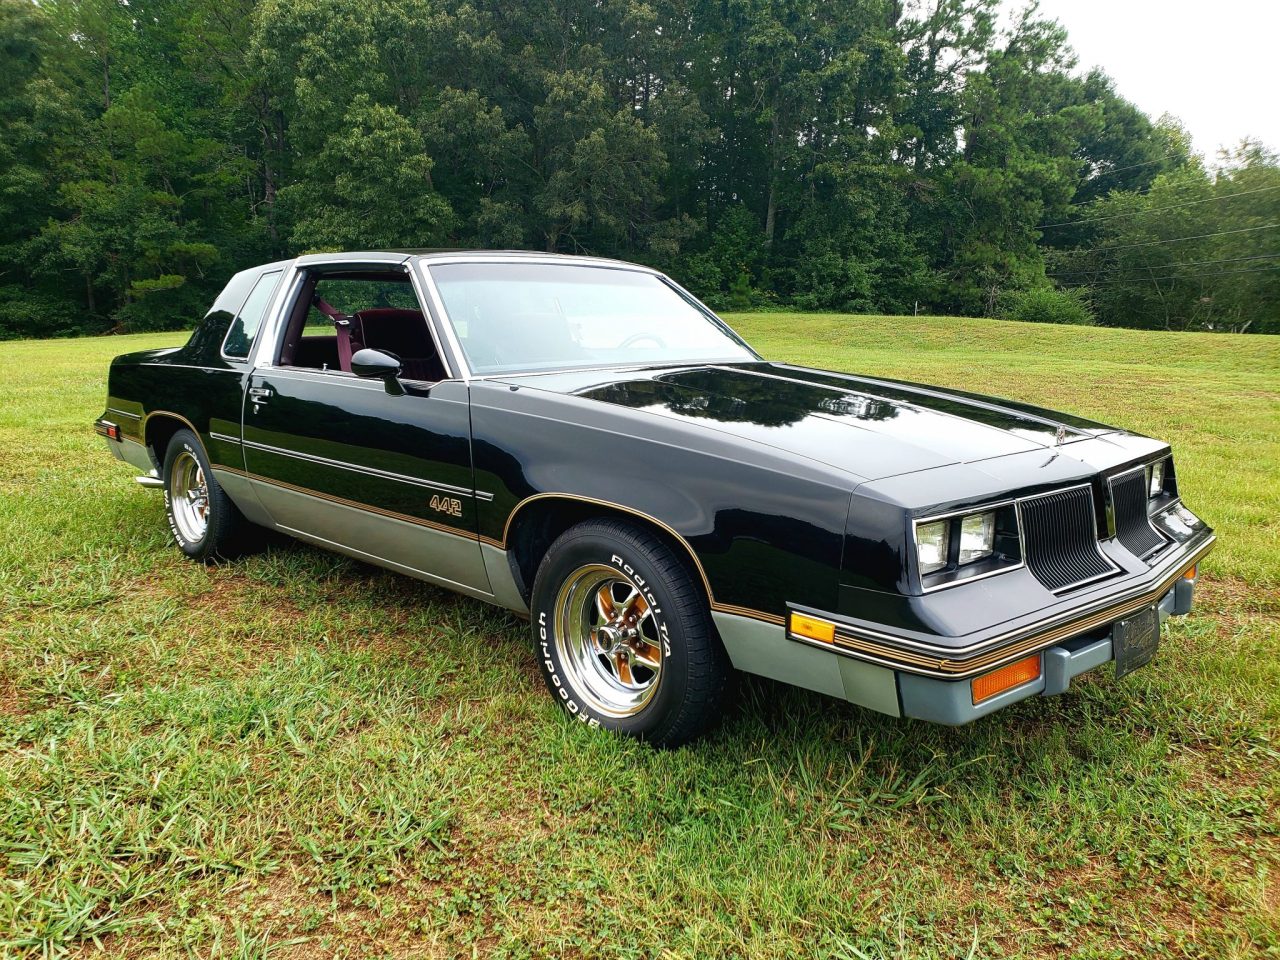 1986 Oldsmobile 442 Review: End of the Line | Out Motorsports